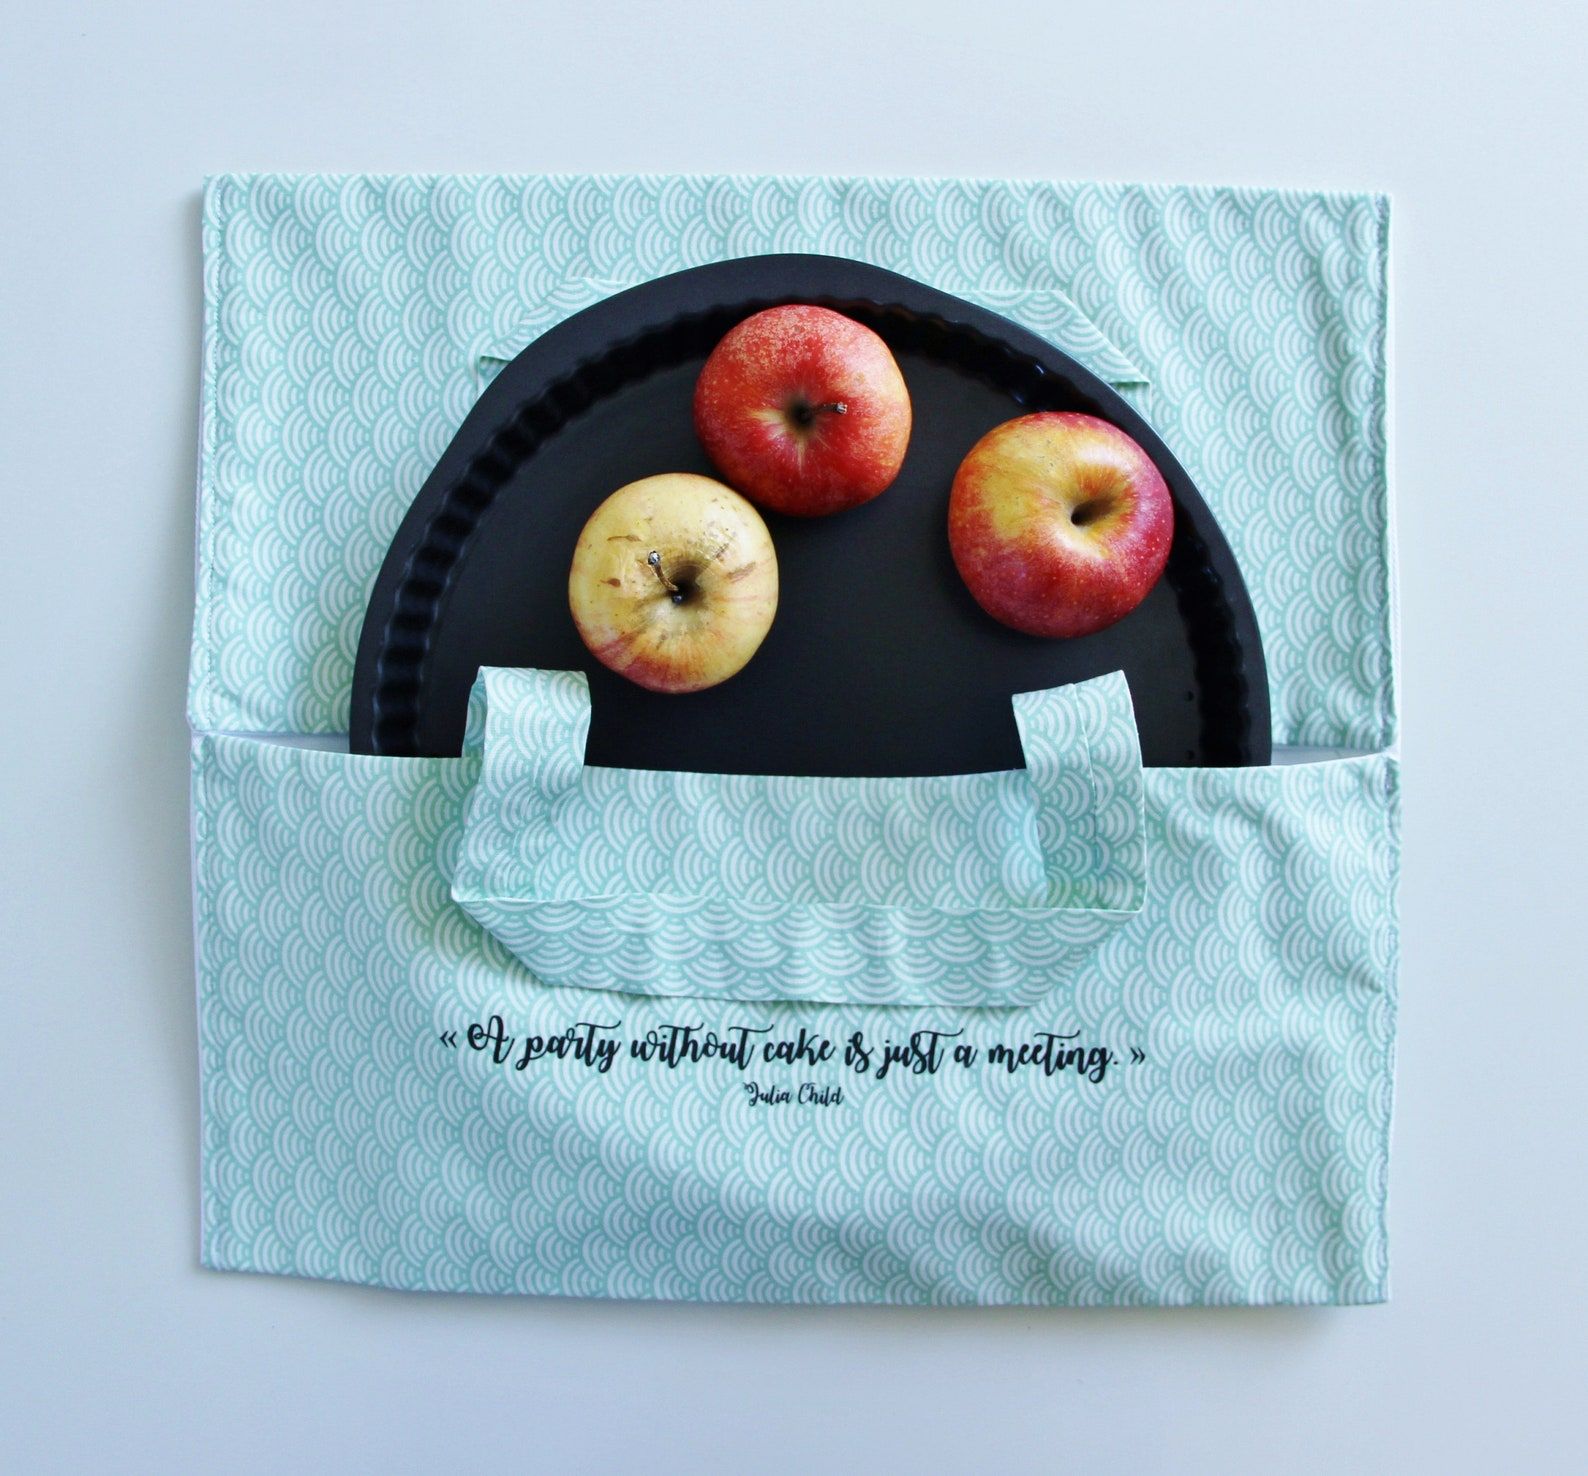 An overhead shot of a light blue, cloth pie carrier. There is a pie tin poking out of the carrier with three apples in it. There is writing on the bottom half of the pie carrier that reads, "A party without cake is just a meeting," Julia Child.